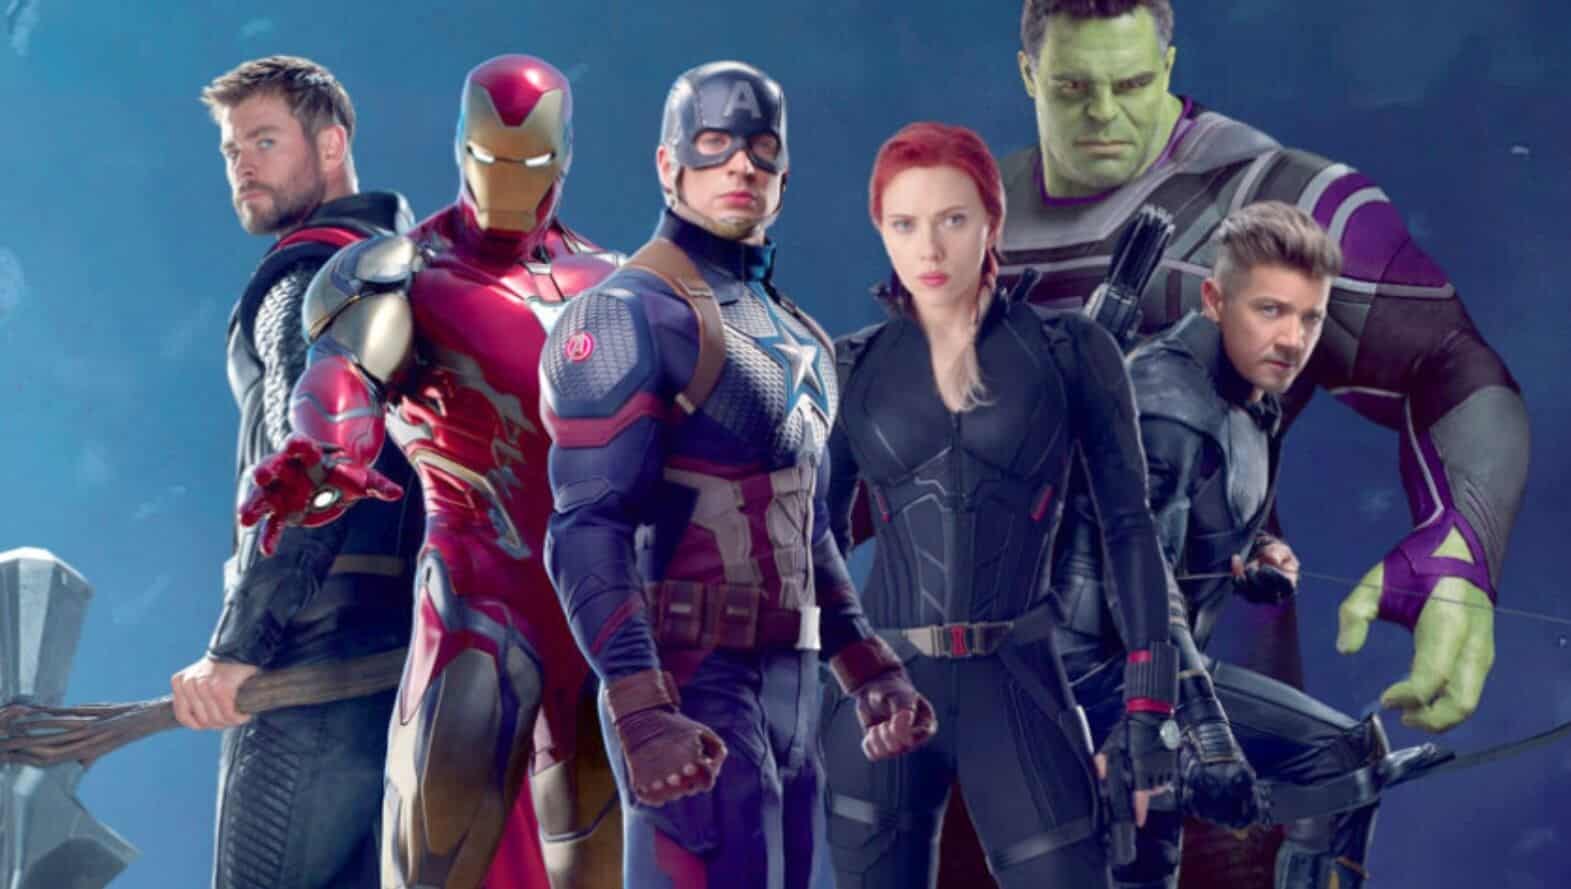 Could There Be An MCU Future For The Original Avengers After 'Avengers: Endgame'?